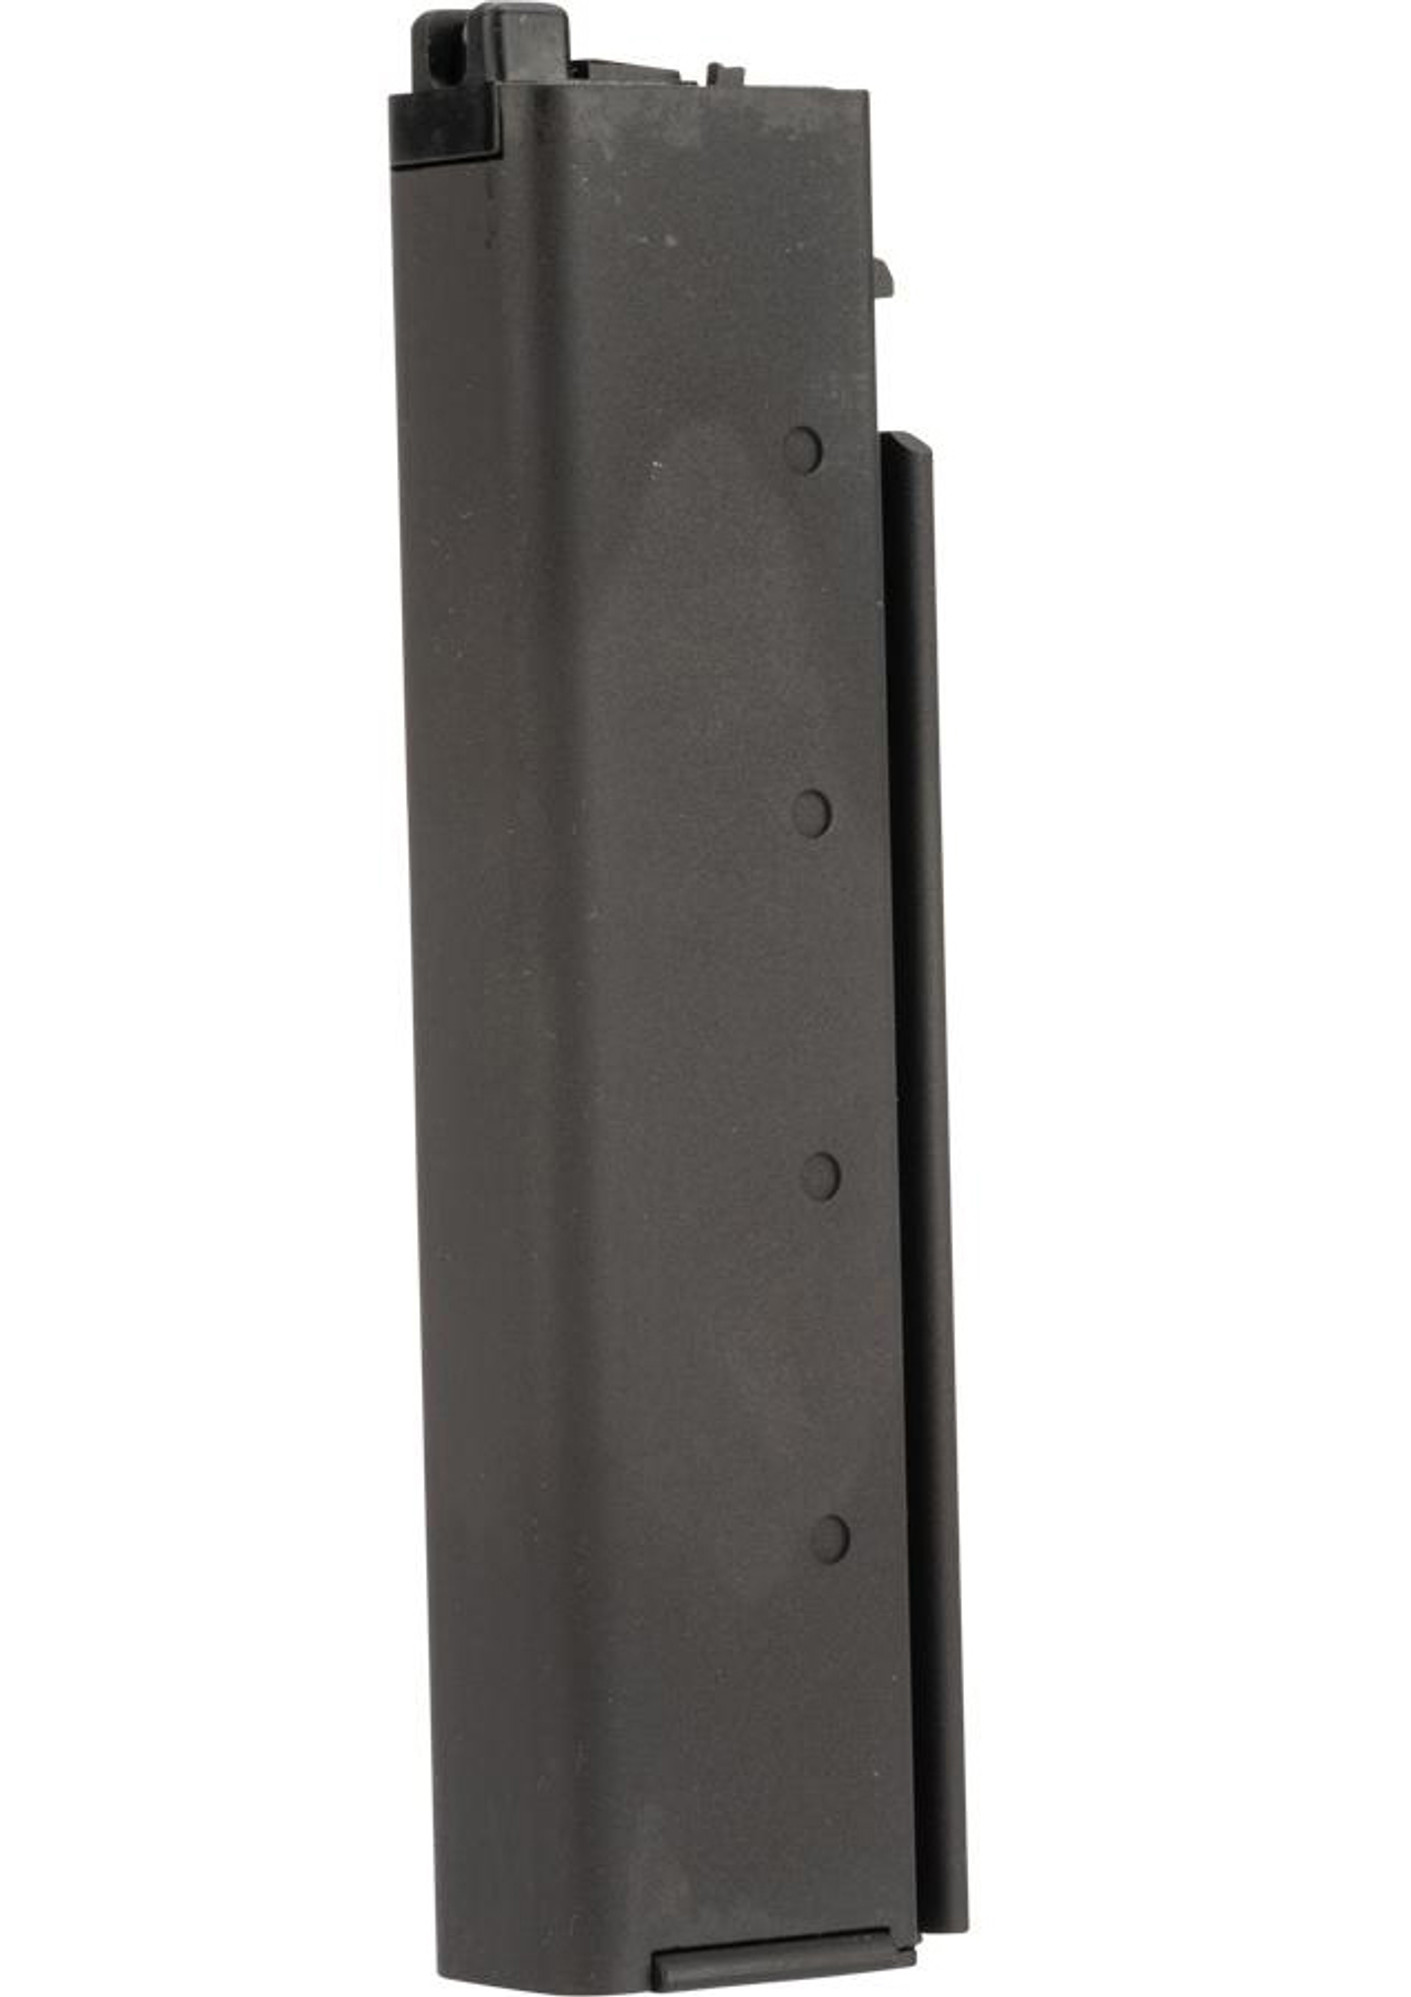 Magazine for WE-Tech Thompson M1A1 Gas Blowback Airsoft Rifle by Cybergun